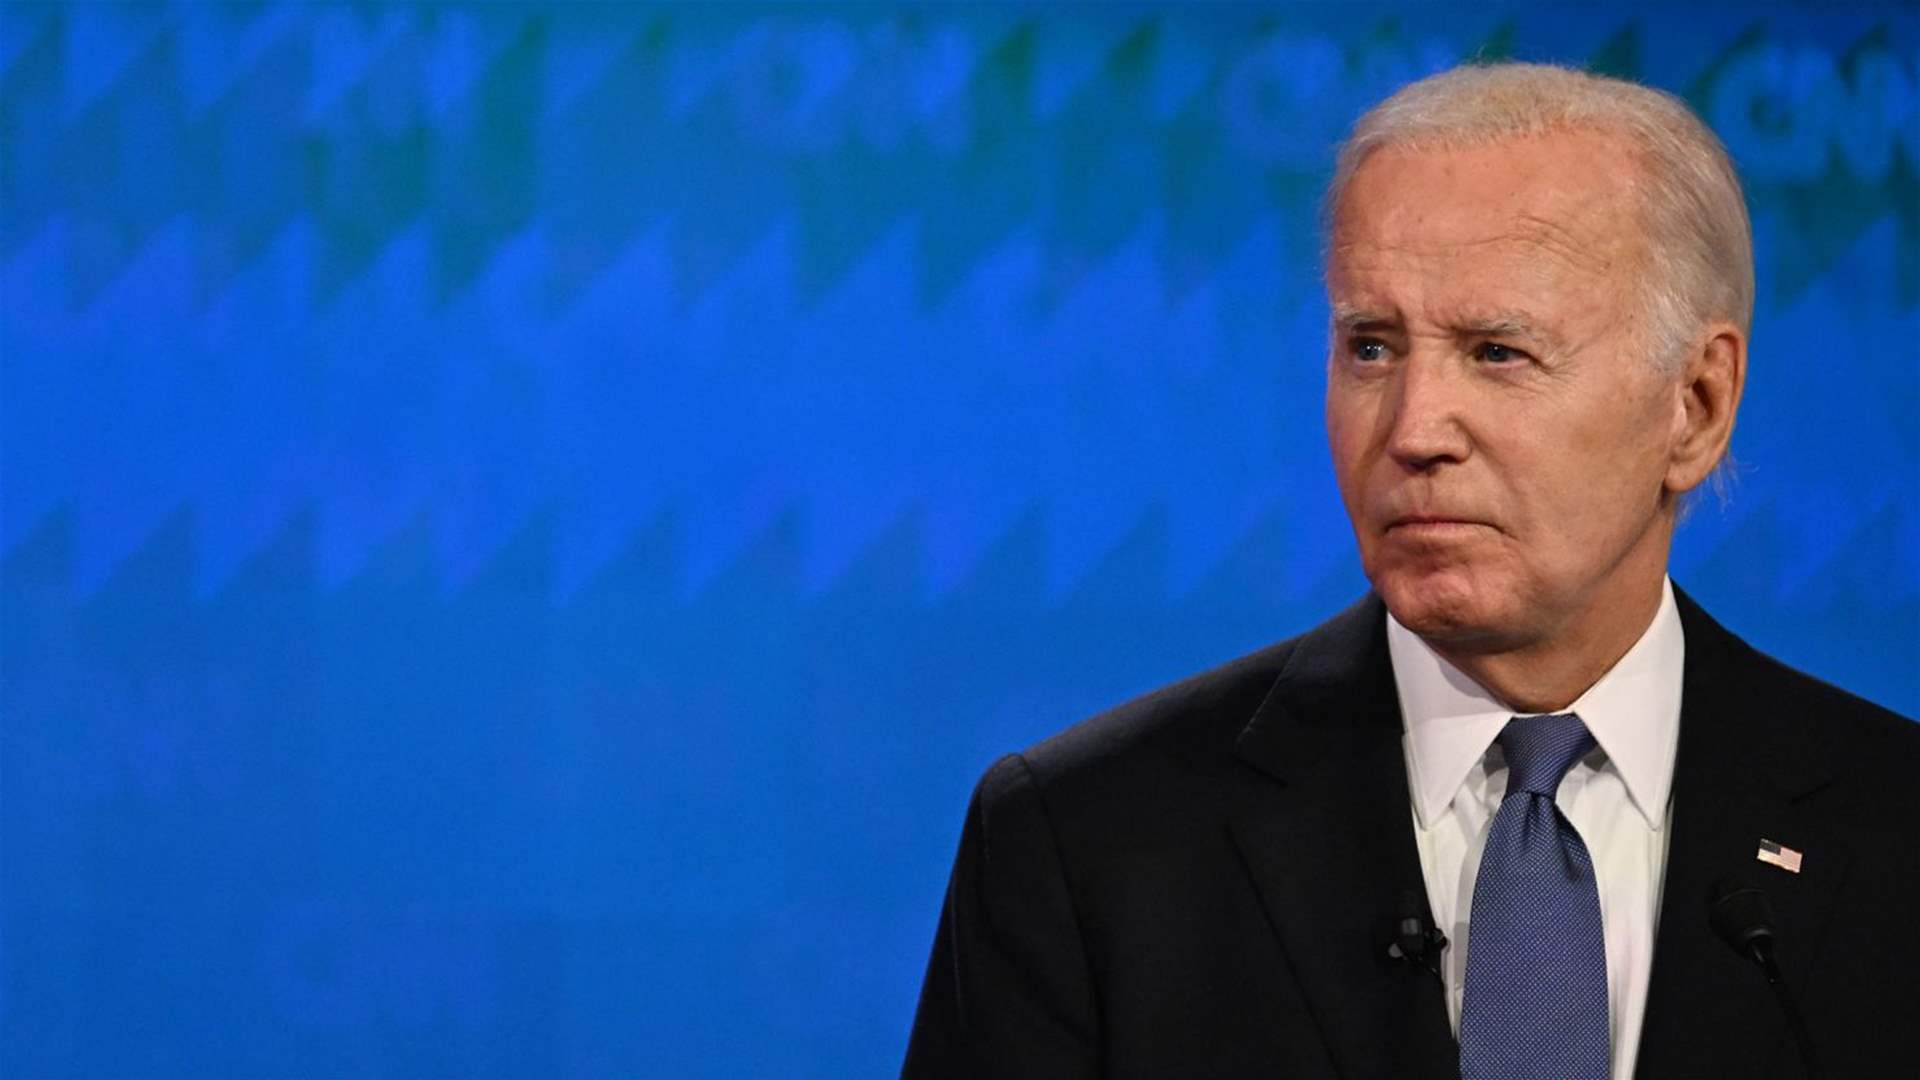 Biden &#39;knows how to come back&#39; after poor debate